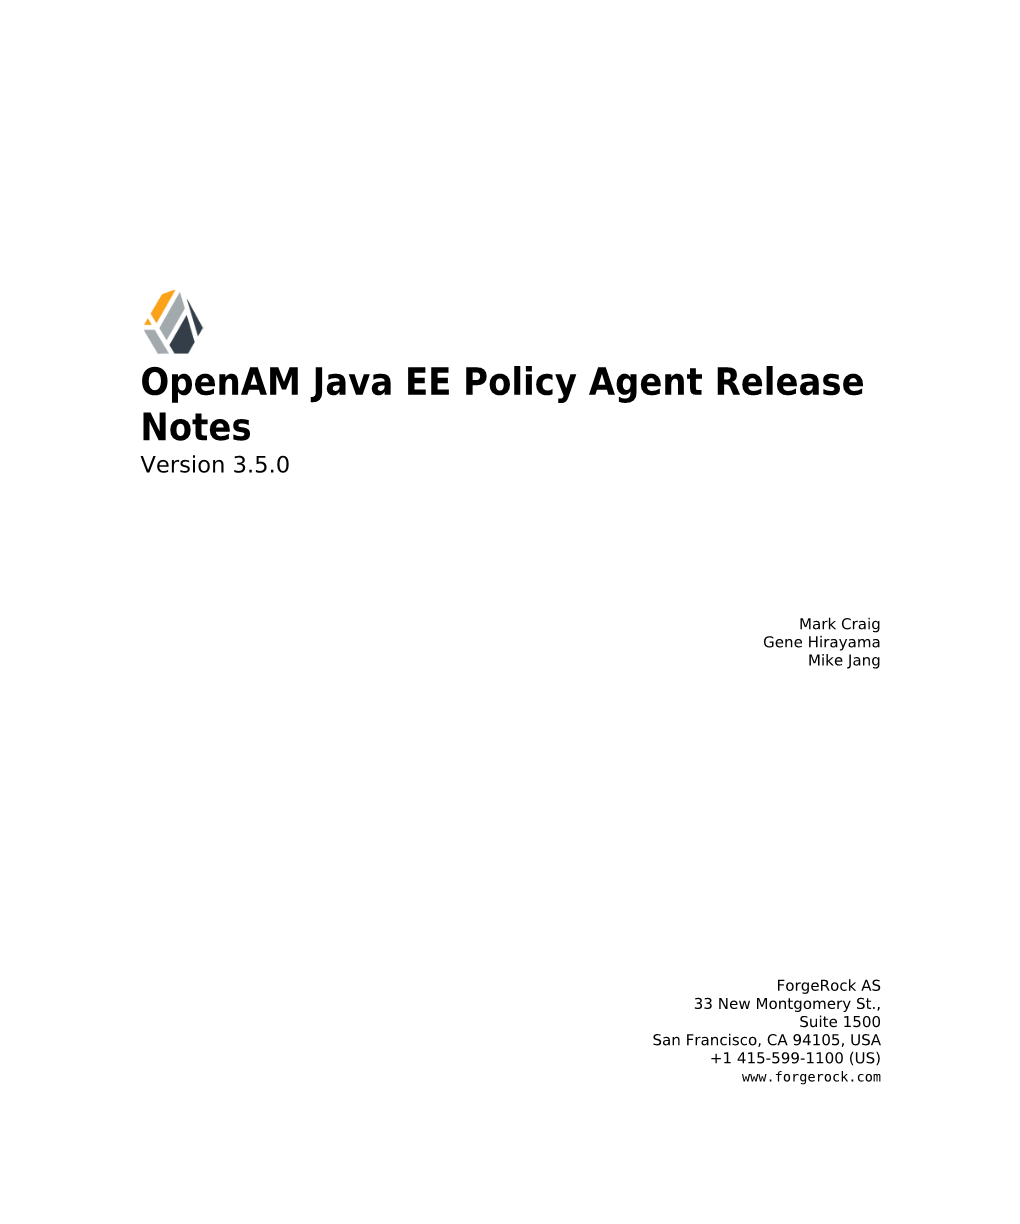 Openam Java EE Policy Agent Release Notes Version 3.5.0